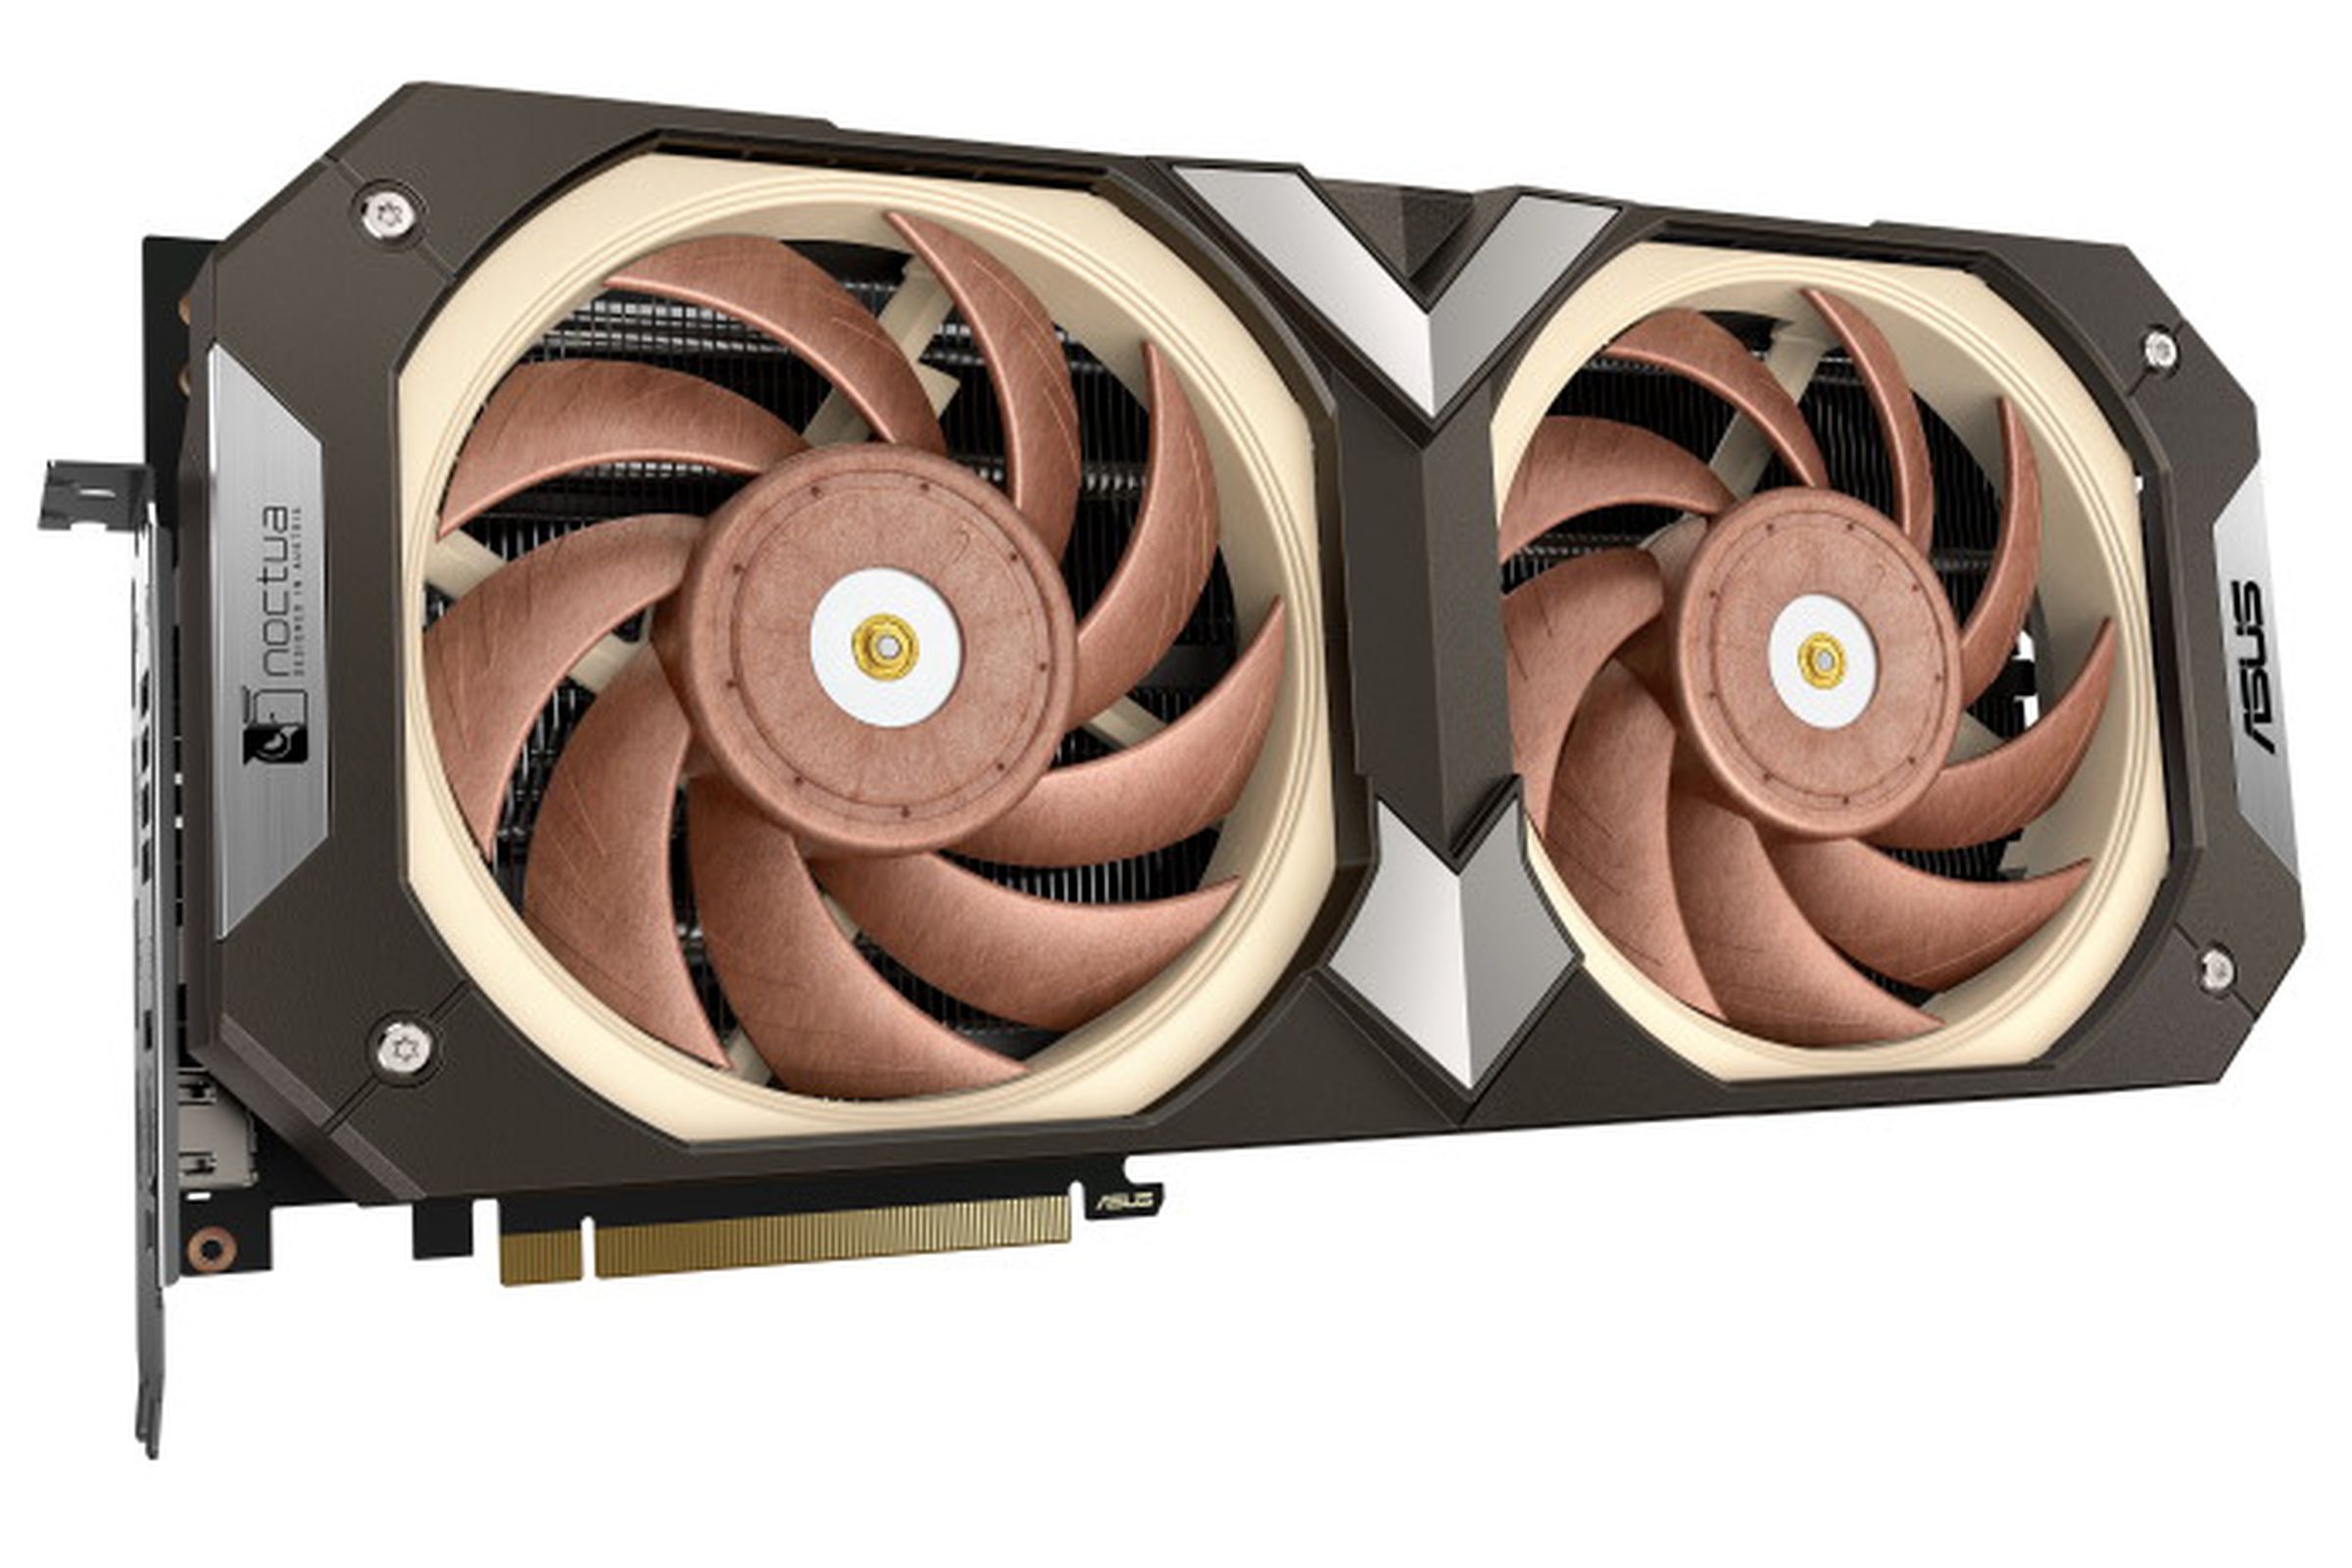 Asus’ RTX 4080 Noctua Edition graphics cards, which features brown and tan colored fans that are a signature of Noctua coolers.